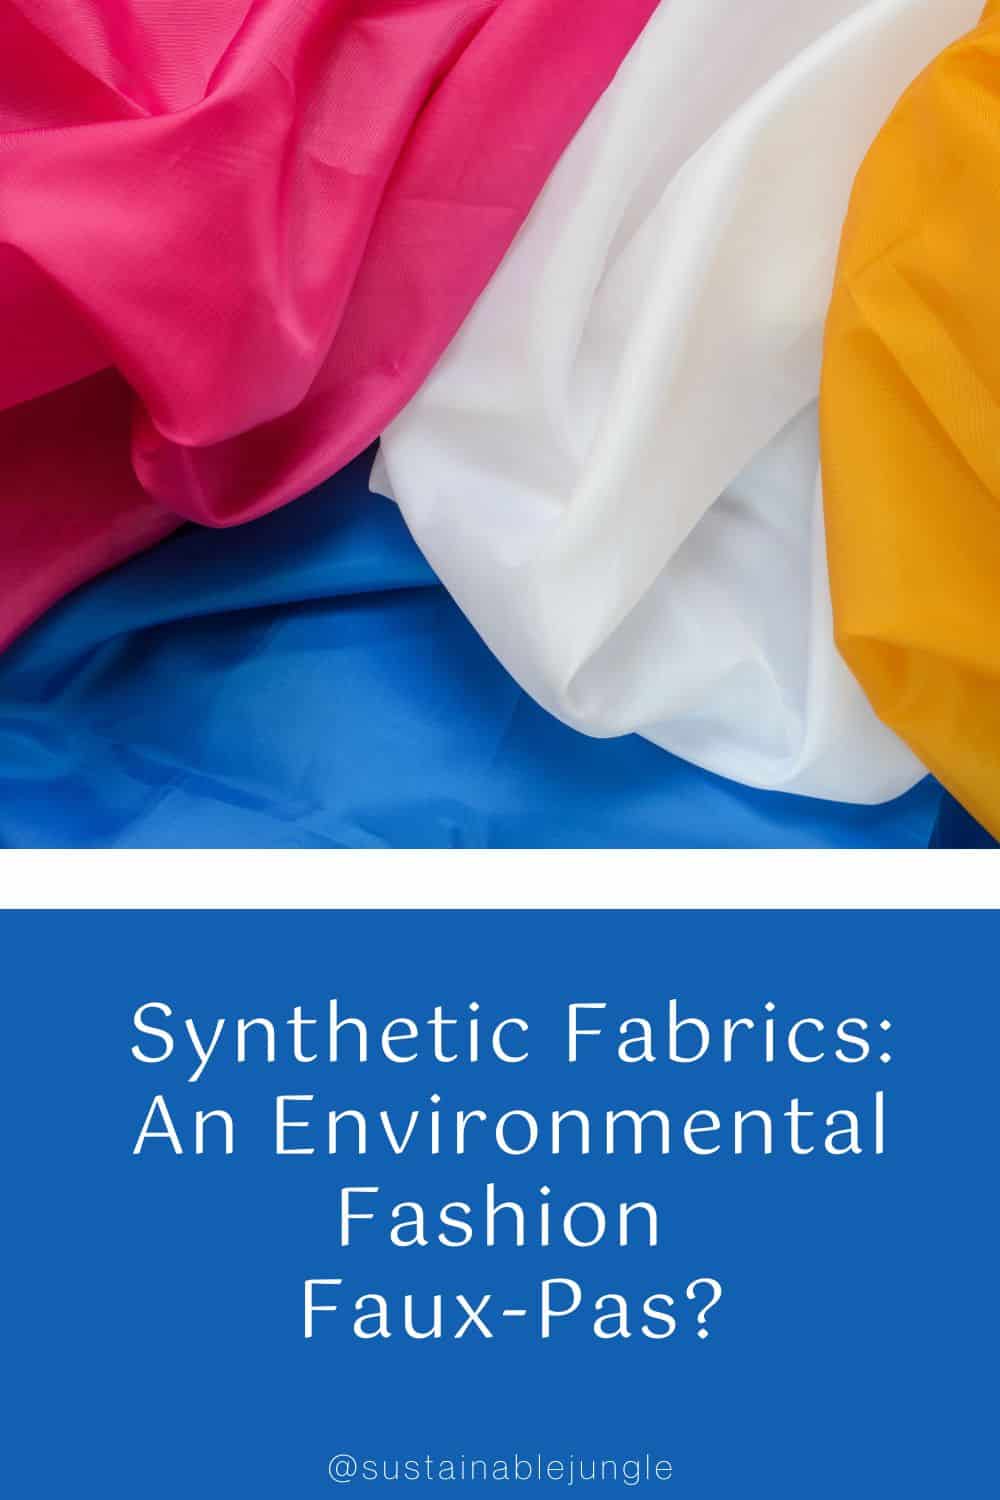 Synthetic Fabrics: An Environmental Fashion Faux-Pas? Image by v_sot #syntheticfabrics #whataresyntheticfabrics #syntheticclothing #syntheticmaterials #whyaresyntheticmaterialsbad #syntheticfiberfabrics #sustainablejungle